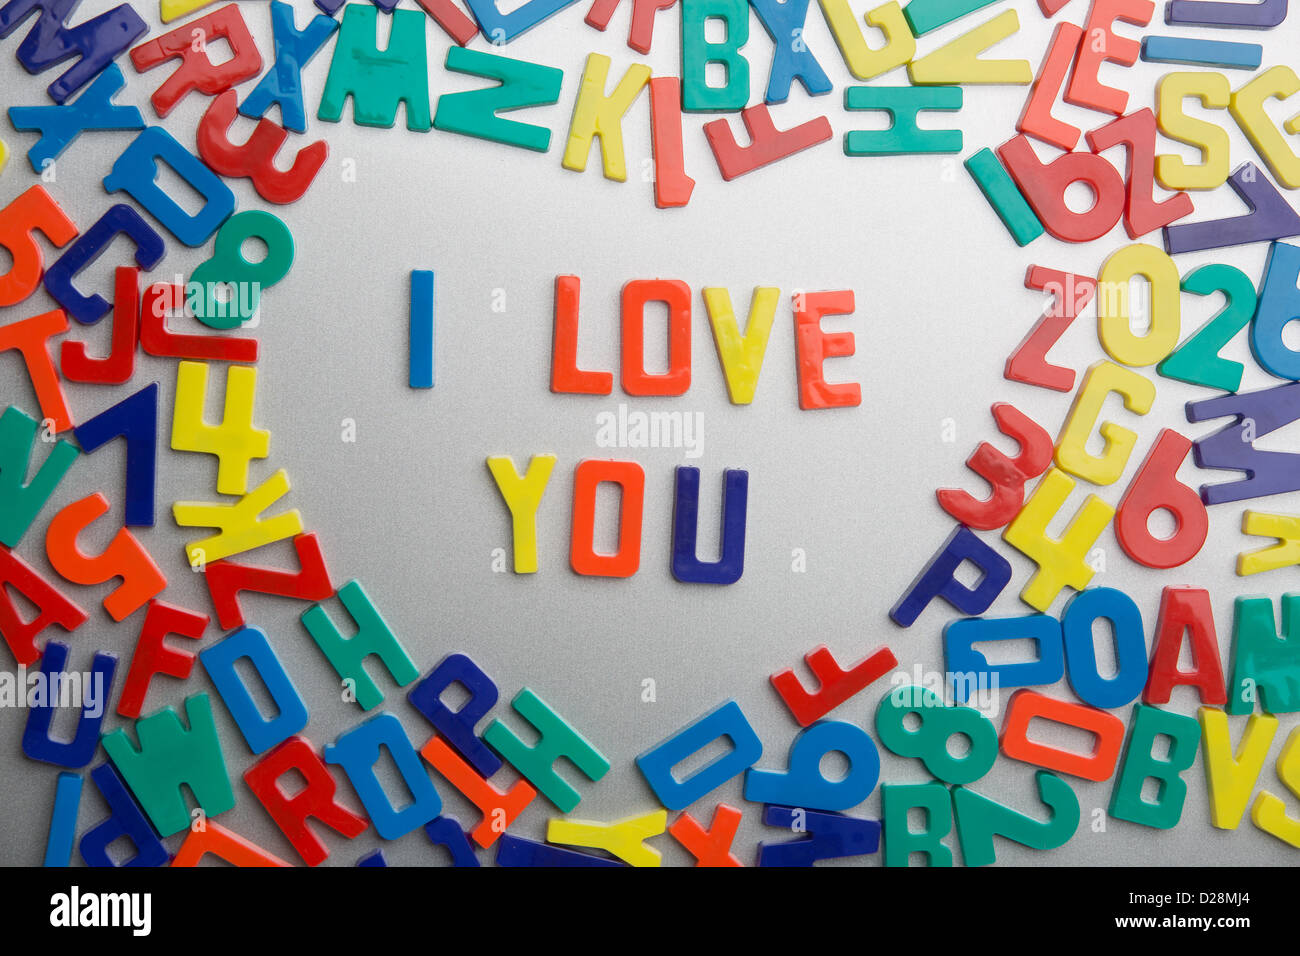 'I Love You' - Refrigerator magnets spell messages out of a jumble of letters Stock Photo